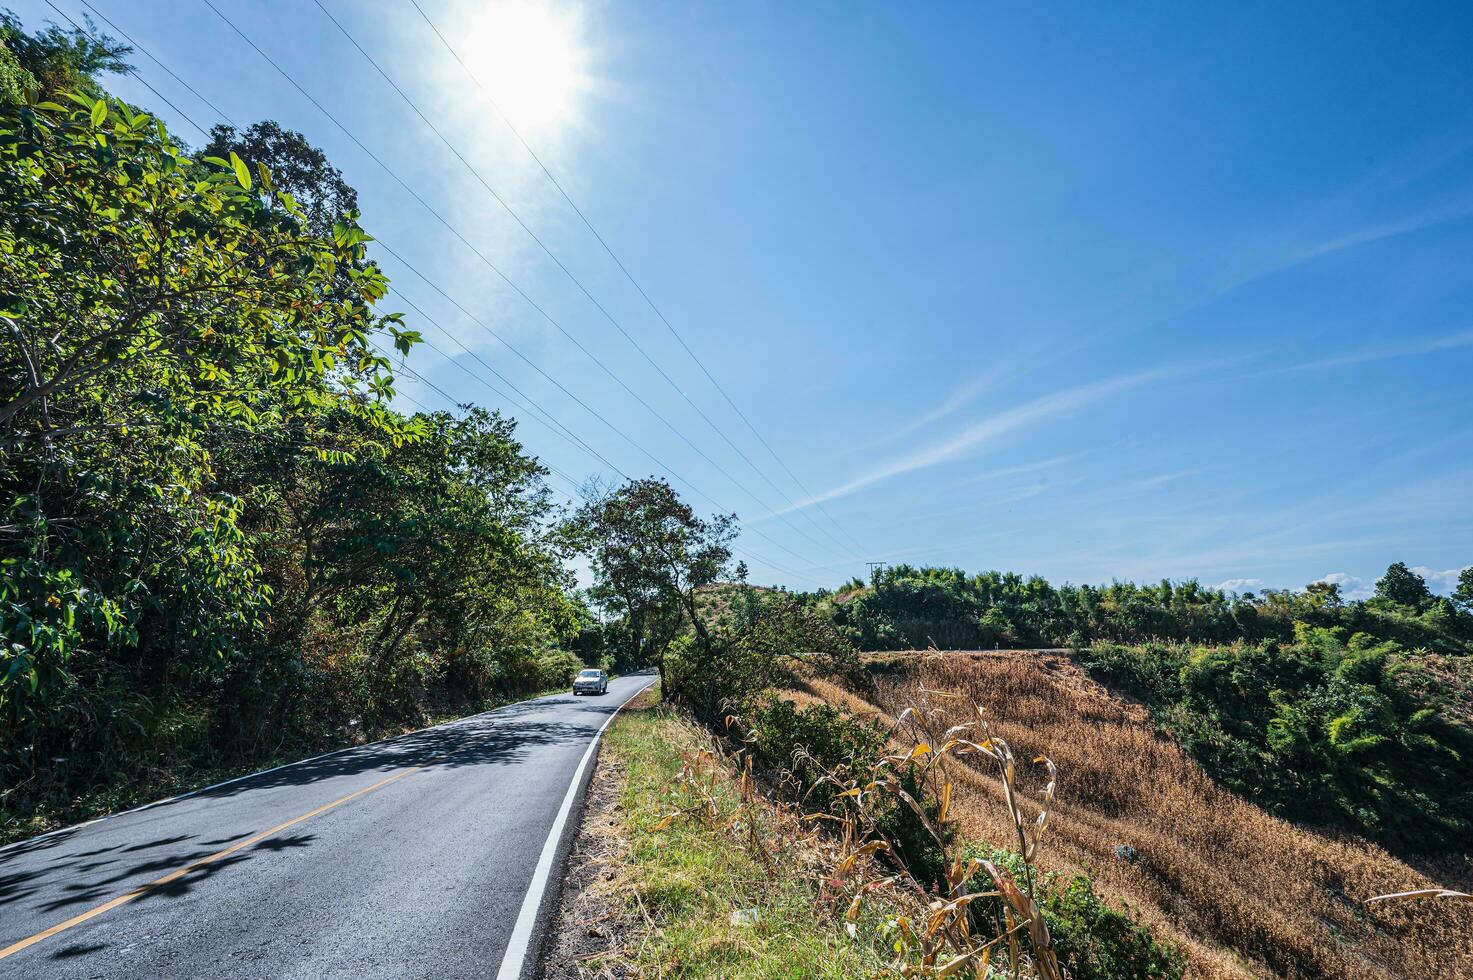 Beautiful road in the rural of nan city thailand.Nan is a rural province in northern Thailand bordering Laos photo